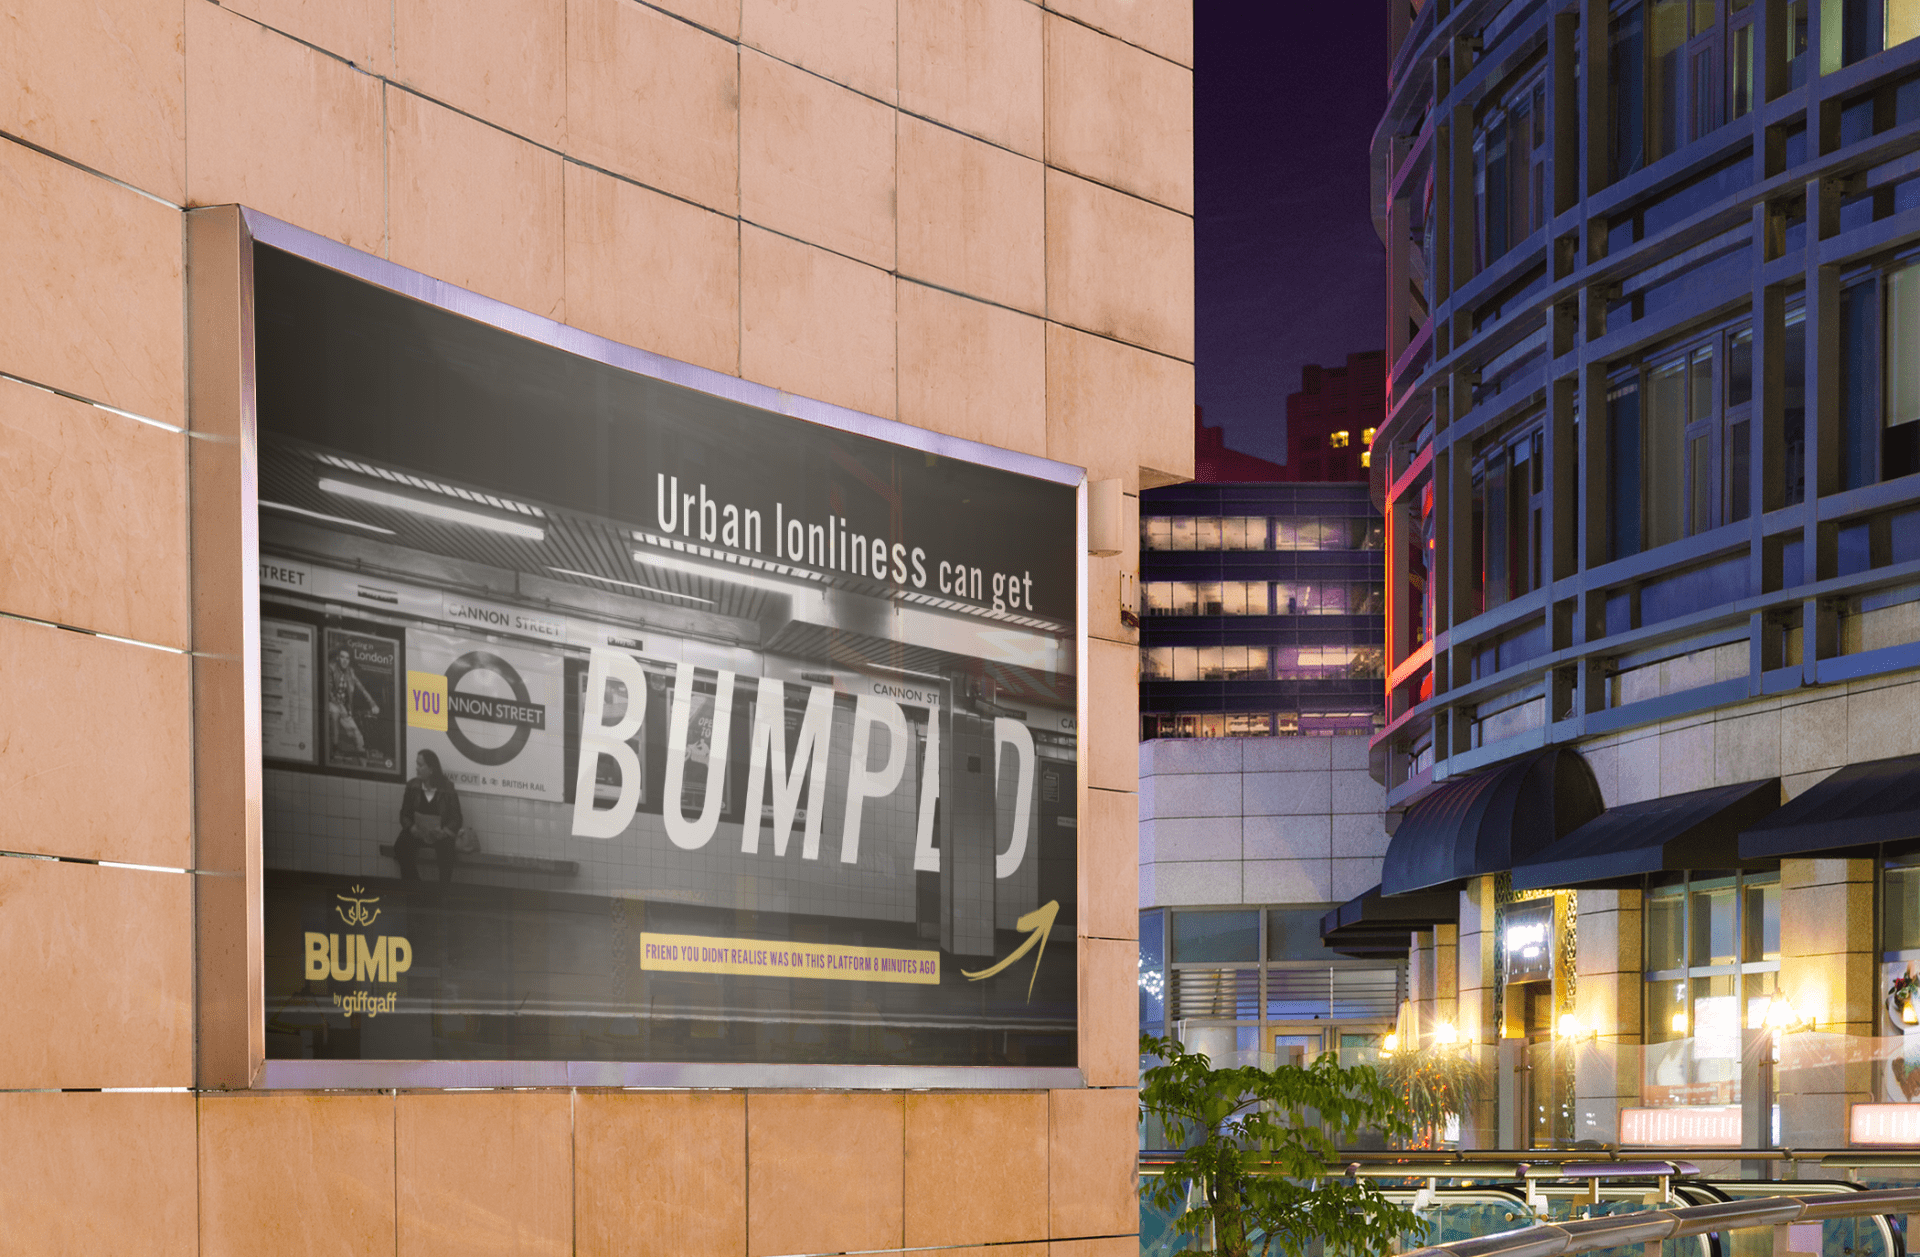 Digitally rendered advert of 'bump' campaign on a poster in a city